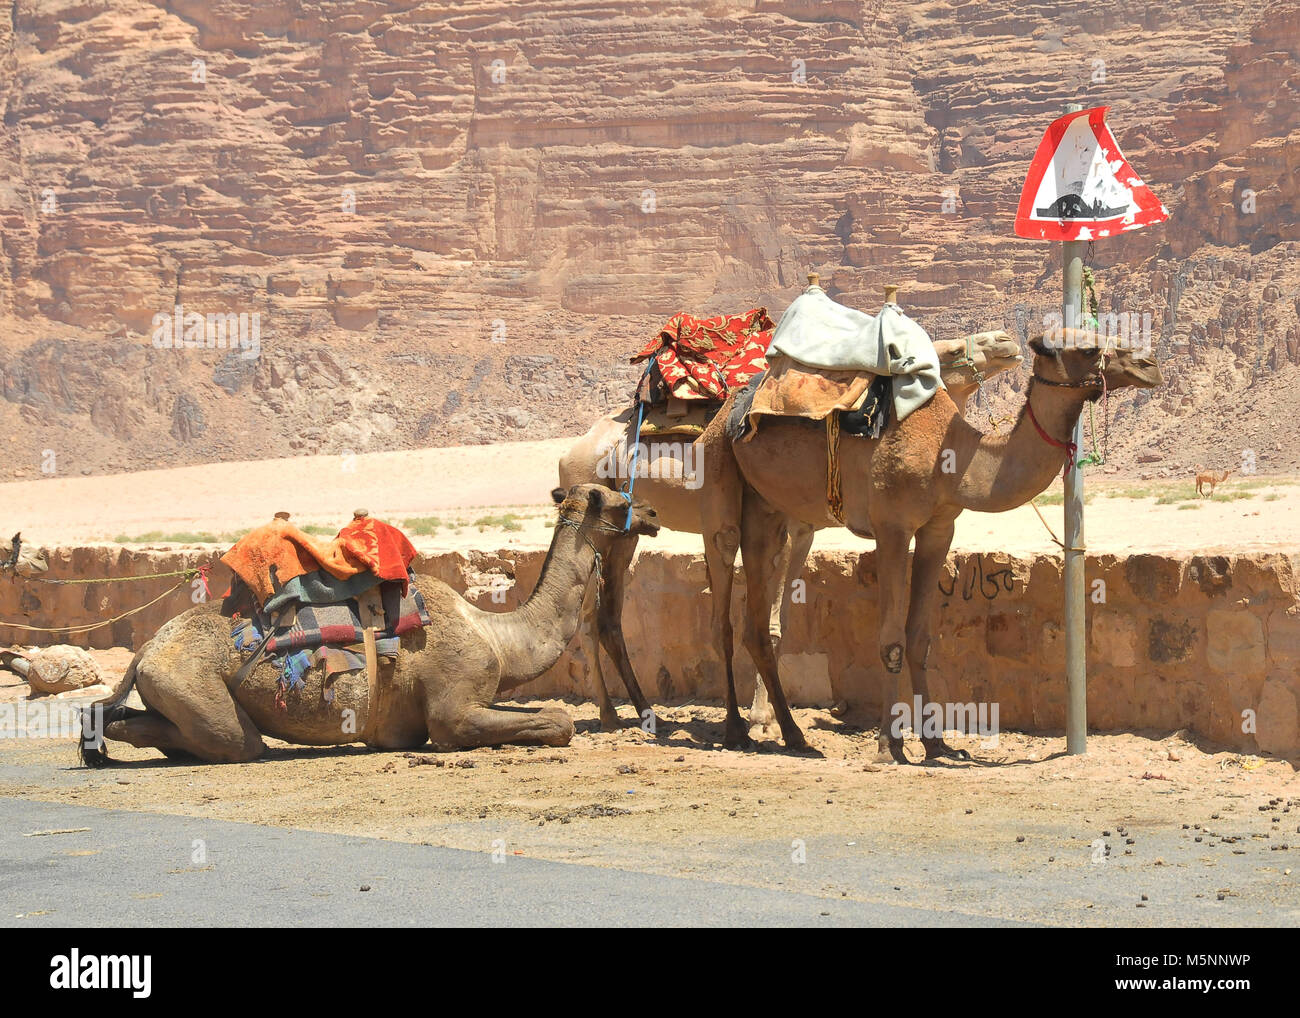 Camels waiting for tourists at the Wadi Rum Village in Jordan Stock Photo